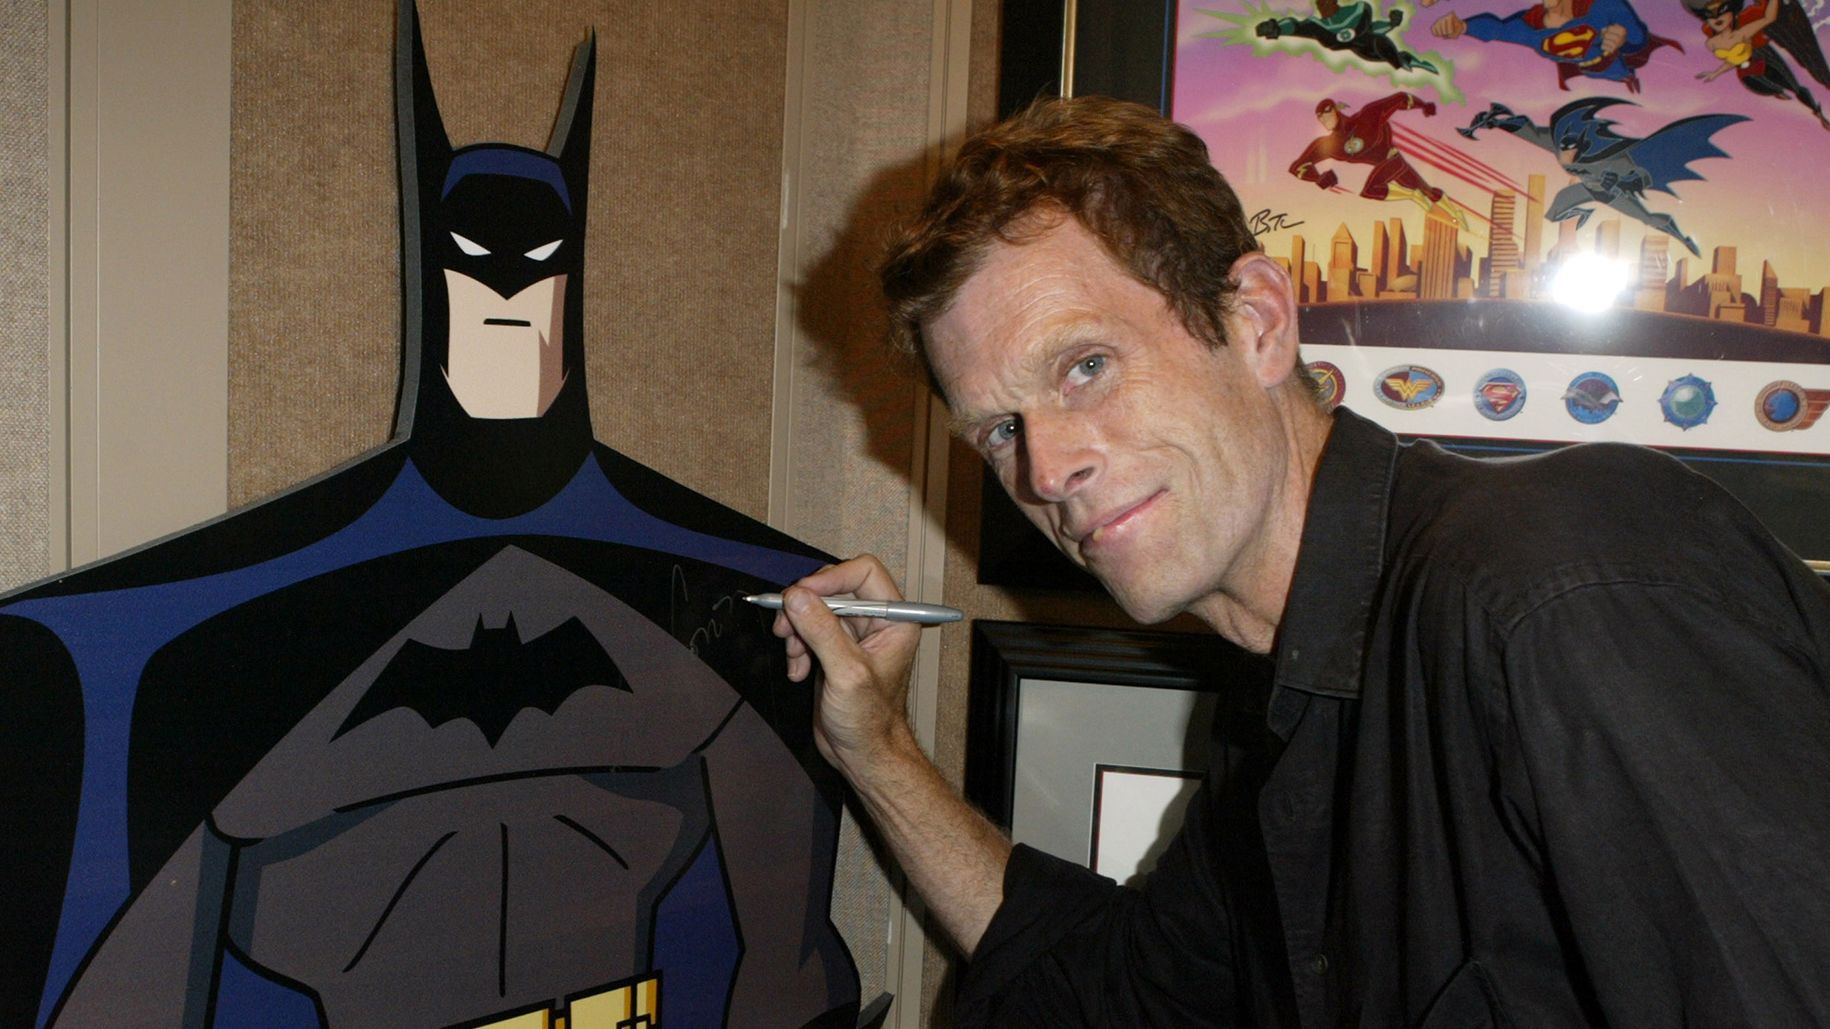 <a href="https://www.cnn.com/2022/11/11/entertainment/kevin-conroy-death-batman-voice-cec/index.html" target="_blank">Kevin Conroy,</a> the man behind the gravelly bass voice of Batman and who popularized that unmistakable growl that separated Bruce Wayne from the Caped Crusader, died on November 10, according to his representative Gary Miereanu. Conroy, 66, died shortly after he was diagnosed with cancer, Miereanu said.